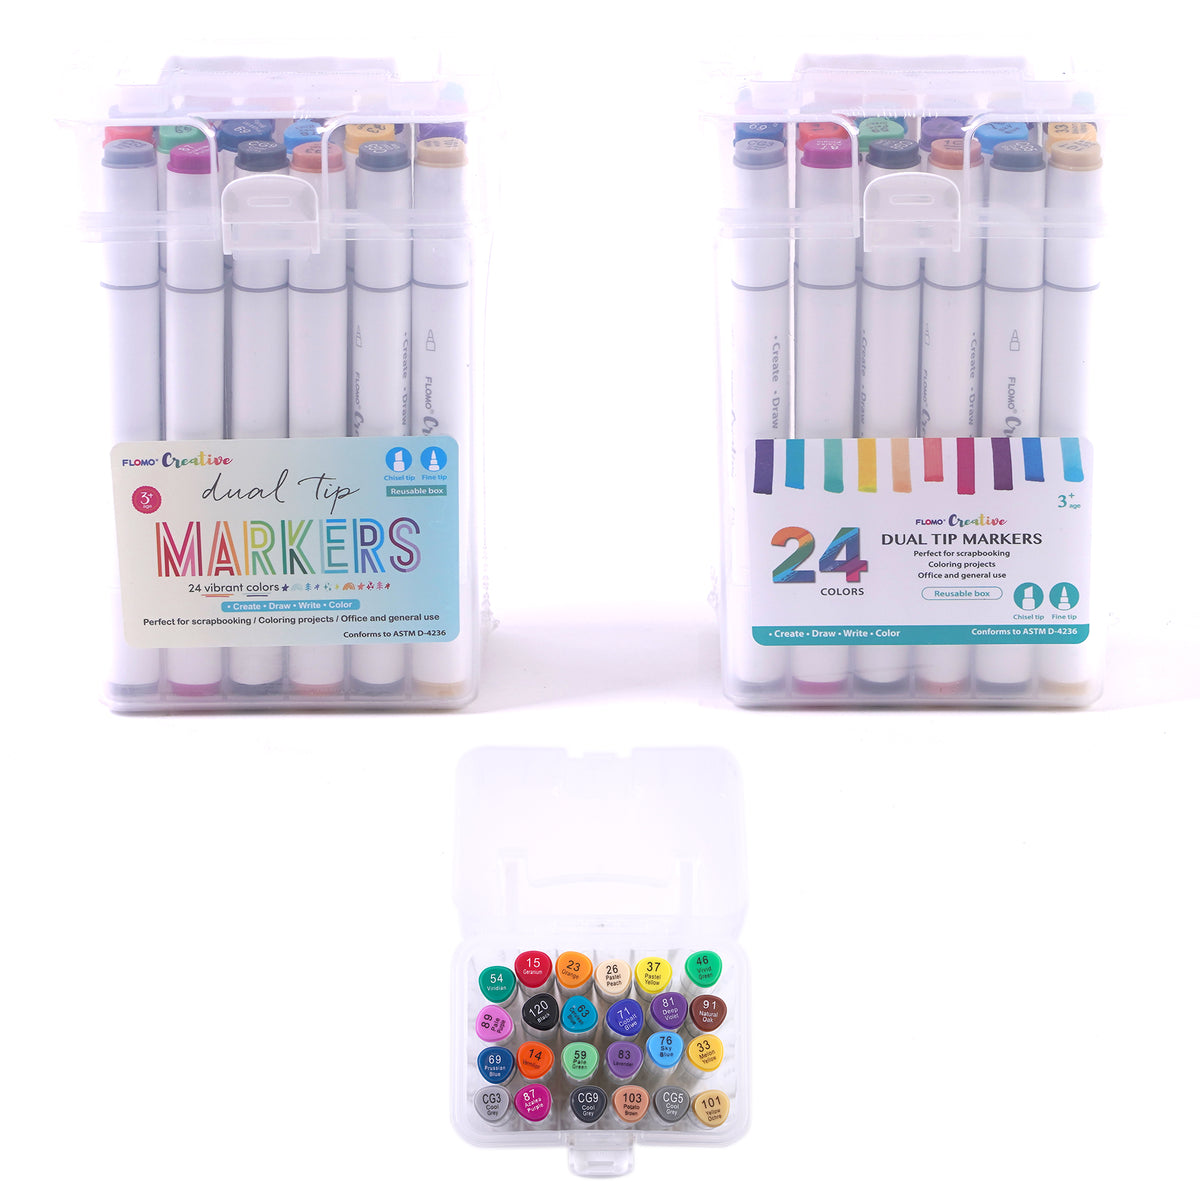 200 COLOUR ALCOHOL MARKERS - DOUBLE TIPPED CHISEL & FINE ALCOHOL, MULTICOLOR